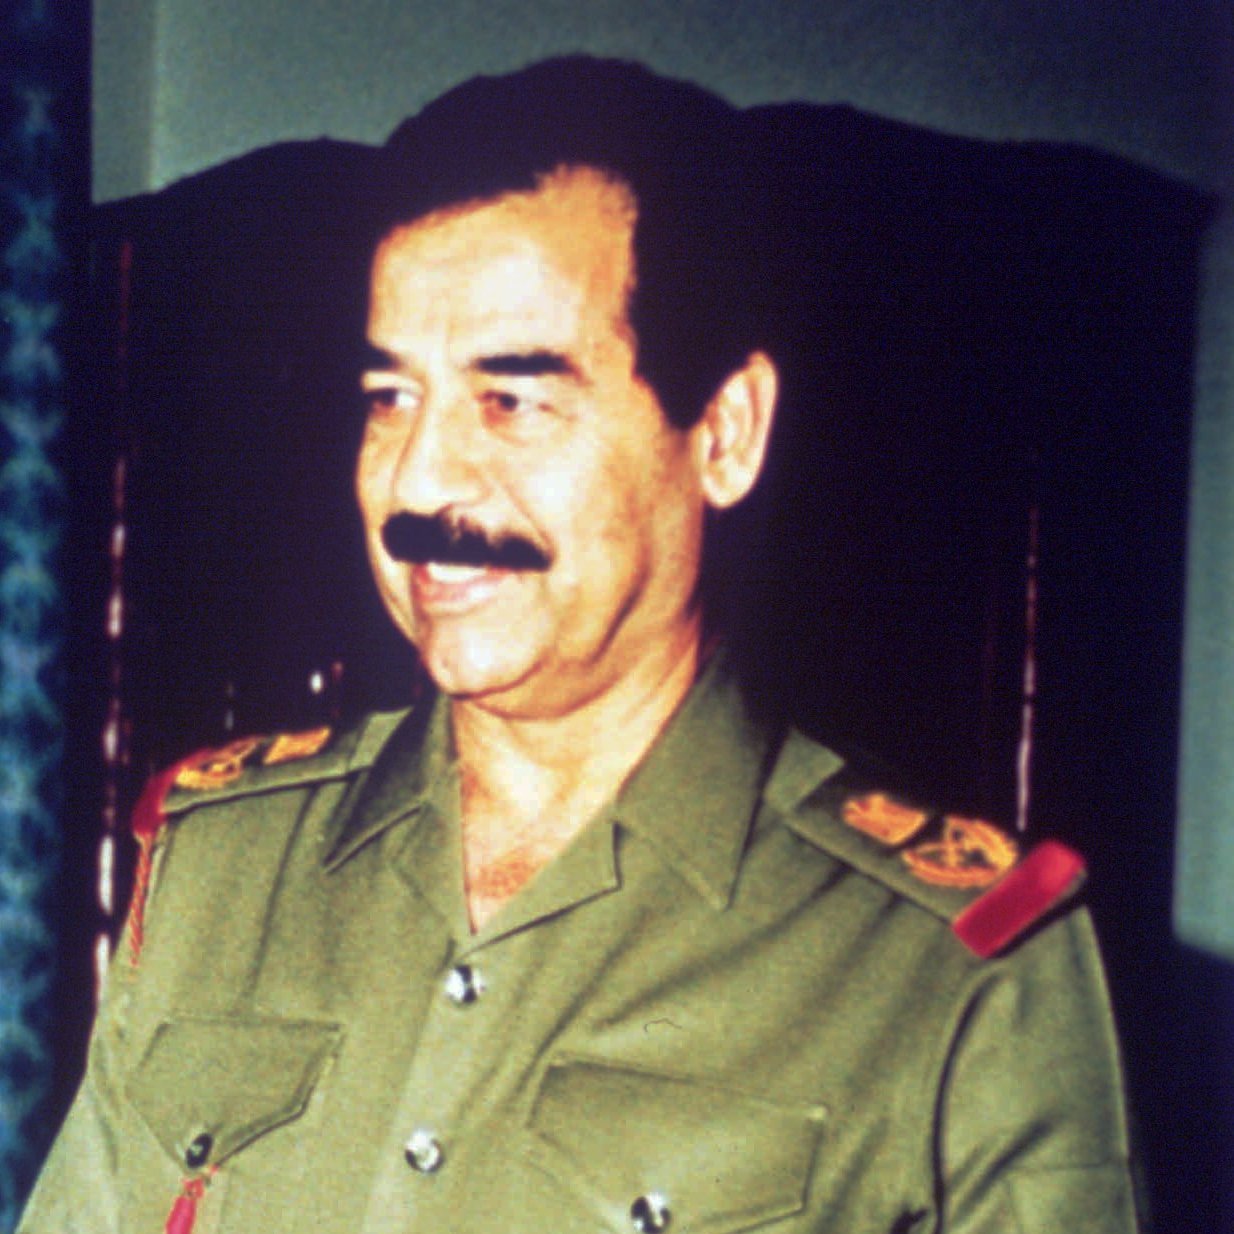 Iraq President Saddam Hussein is shown in Baghdad in January 1991, just before the first U.S. war in Iraq. The American forces would oust the Iraqi leader 12 years later in a second war. AP